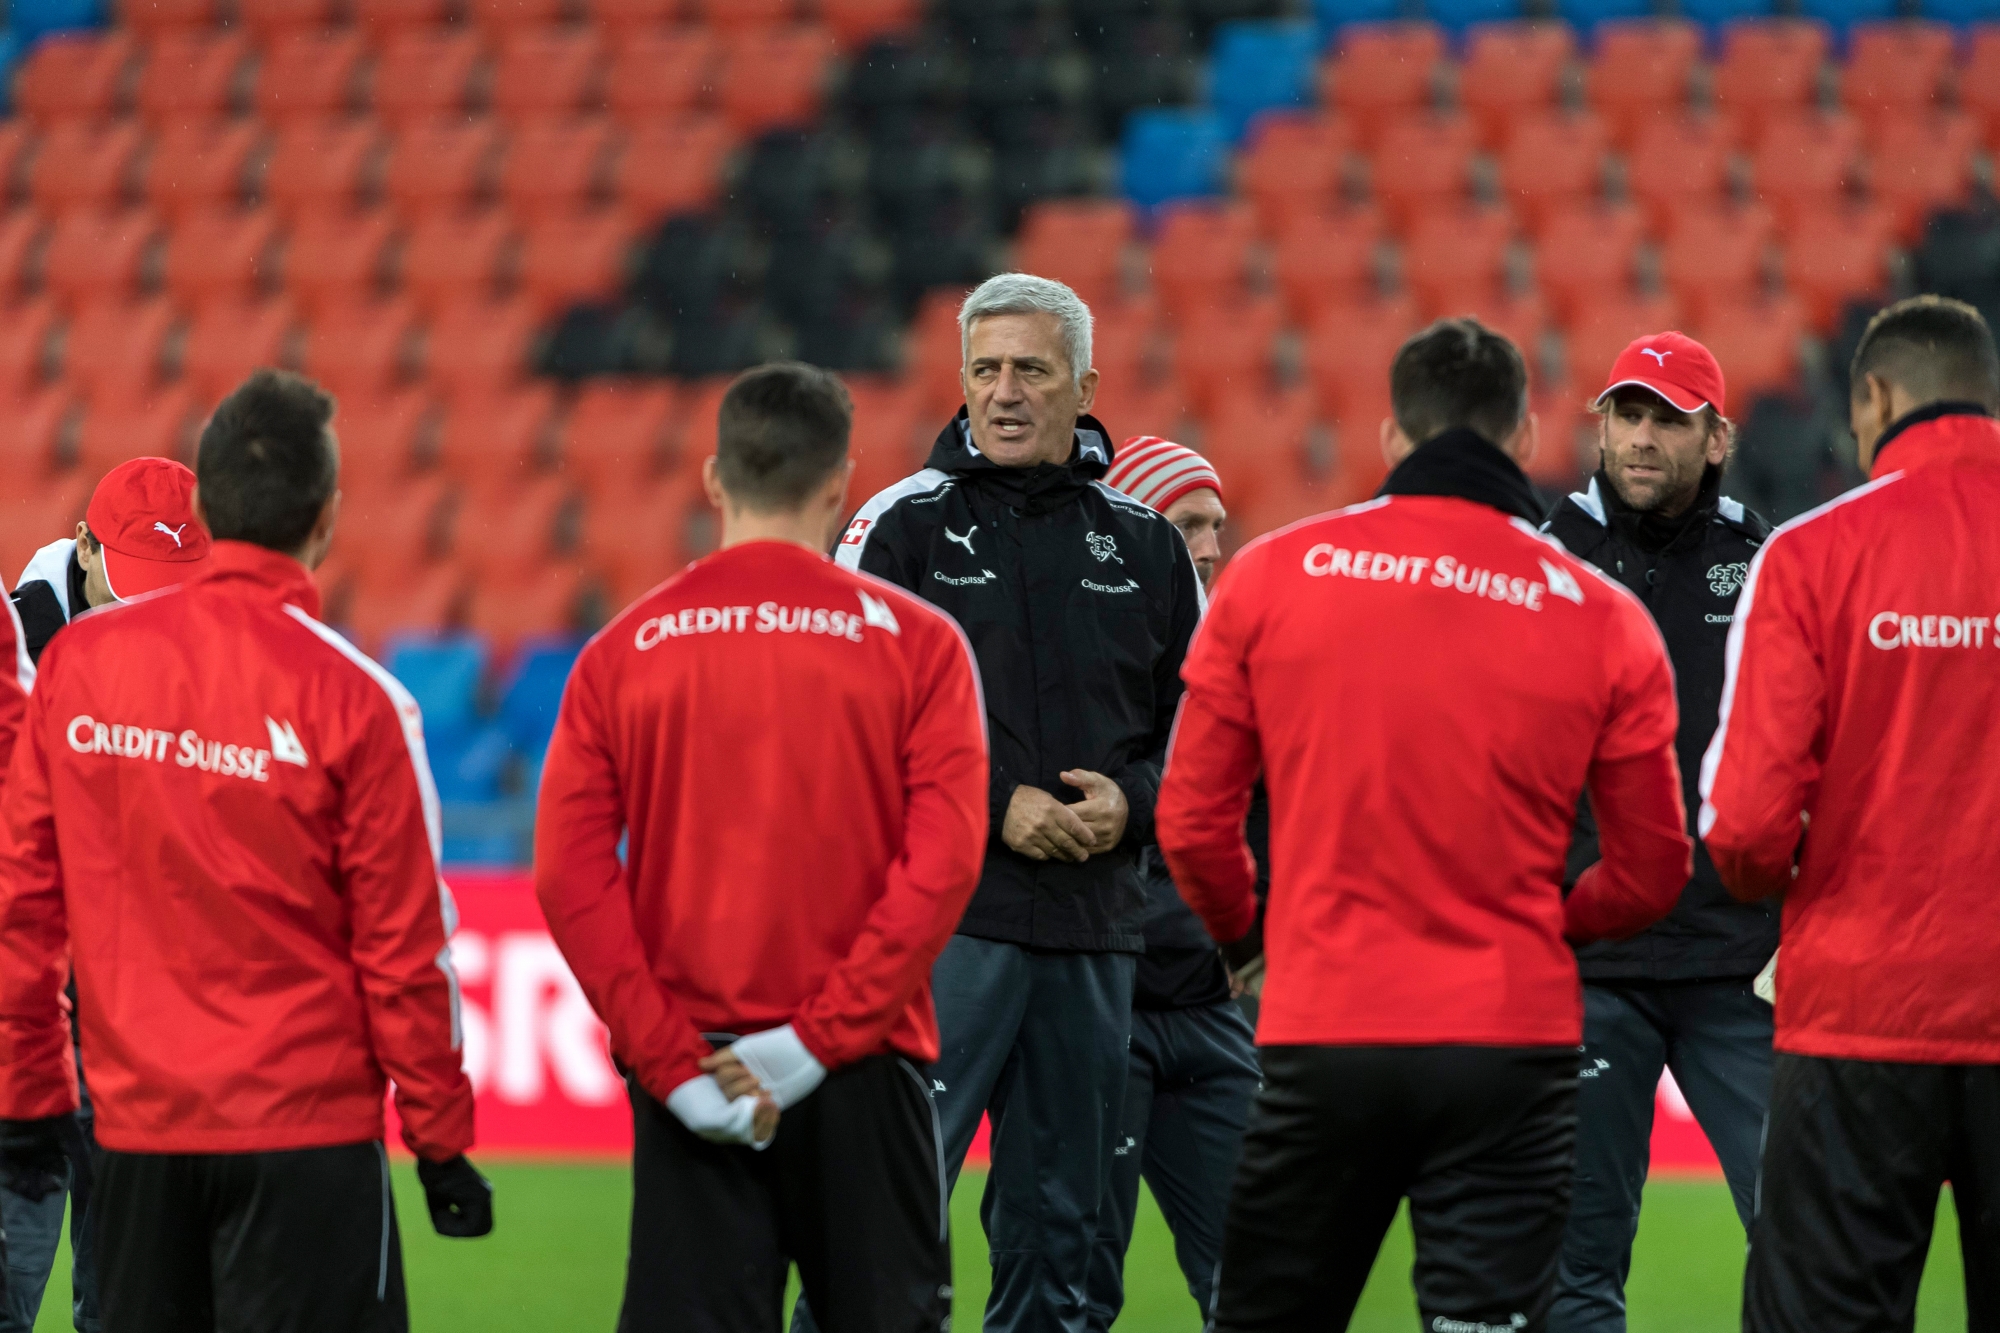 Switzerland's head coach Vladimir Petkovic, center, during a training session of Switzerland's national soccer team, the day before the 2018 FIFA World Cup play-off second leg soccer match between Switzerland and Northern Ireland, in the St. Jakob-Park stadium in Basel, Switzerland, on Saturday, November 11, 2017. (KEYSTONE/Georgios Kefalas) SWITZERLAND SOCCER TEAM SWITZERLAND